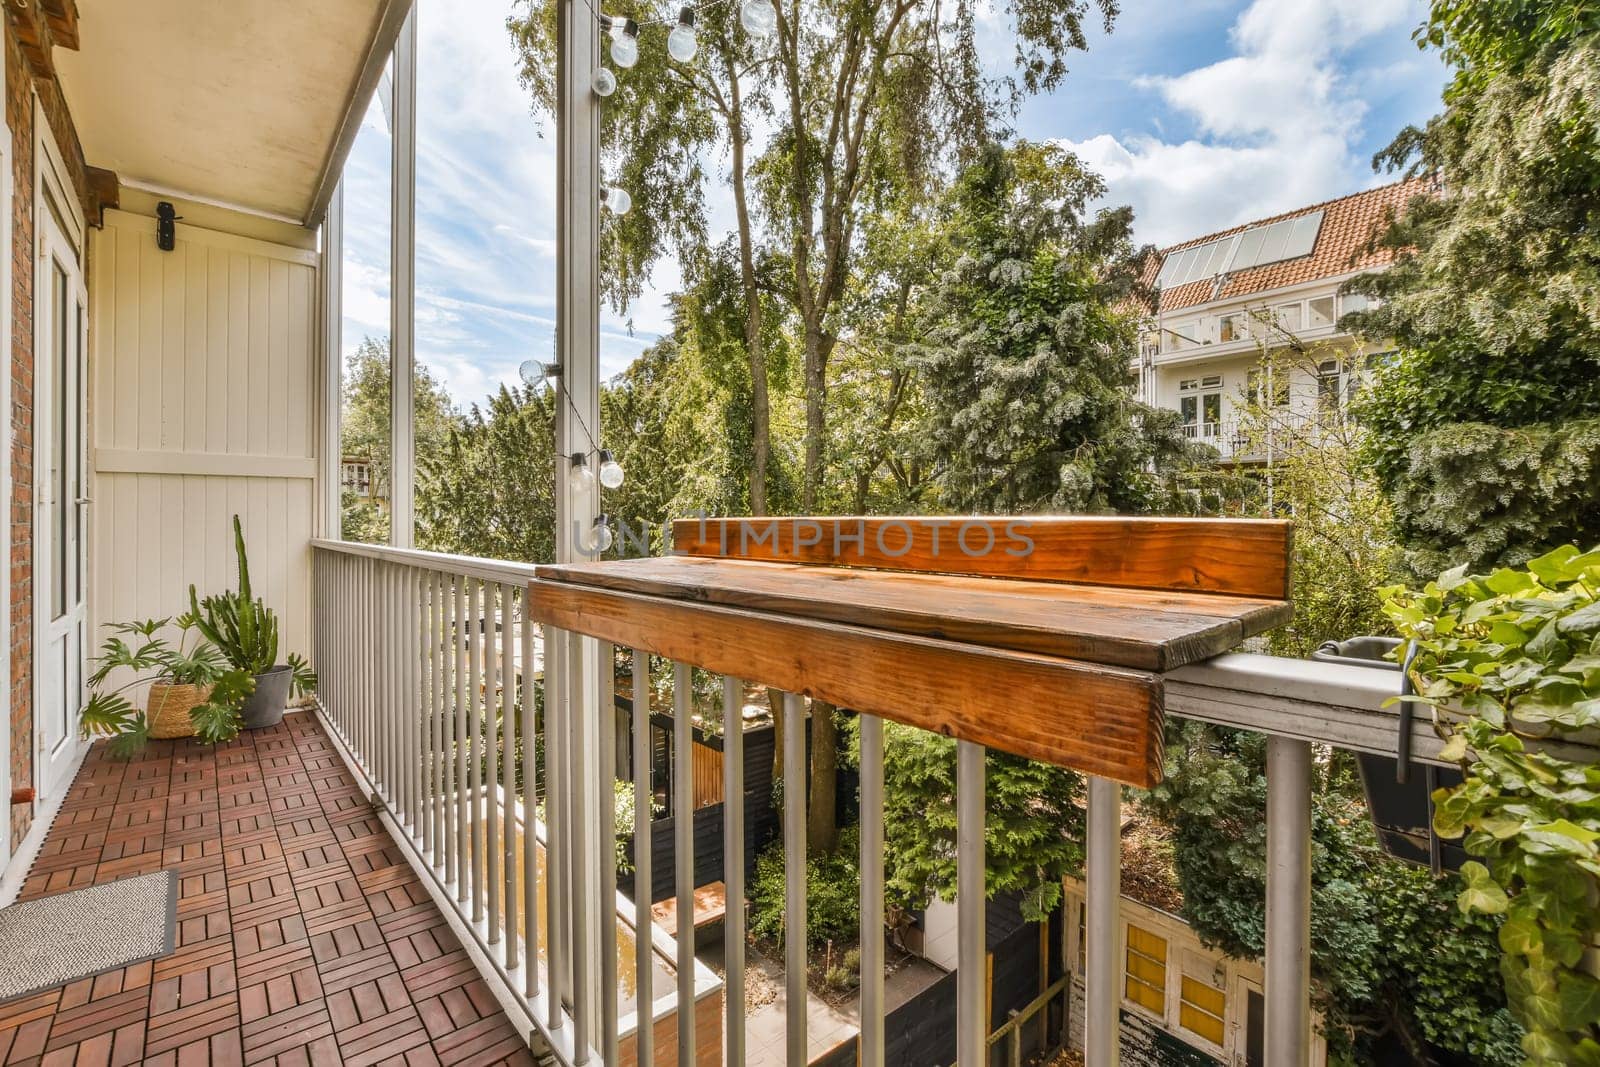 a balcony with brick flooring and white railings, surrounded by lush green trees on the other side of the house